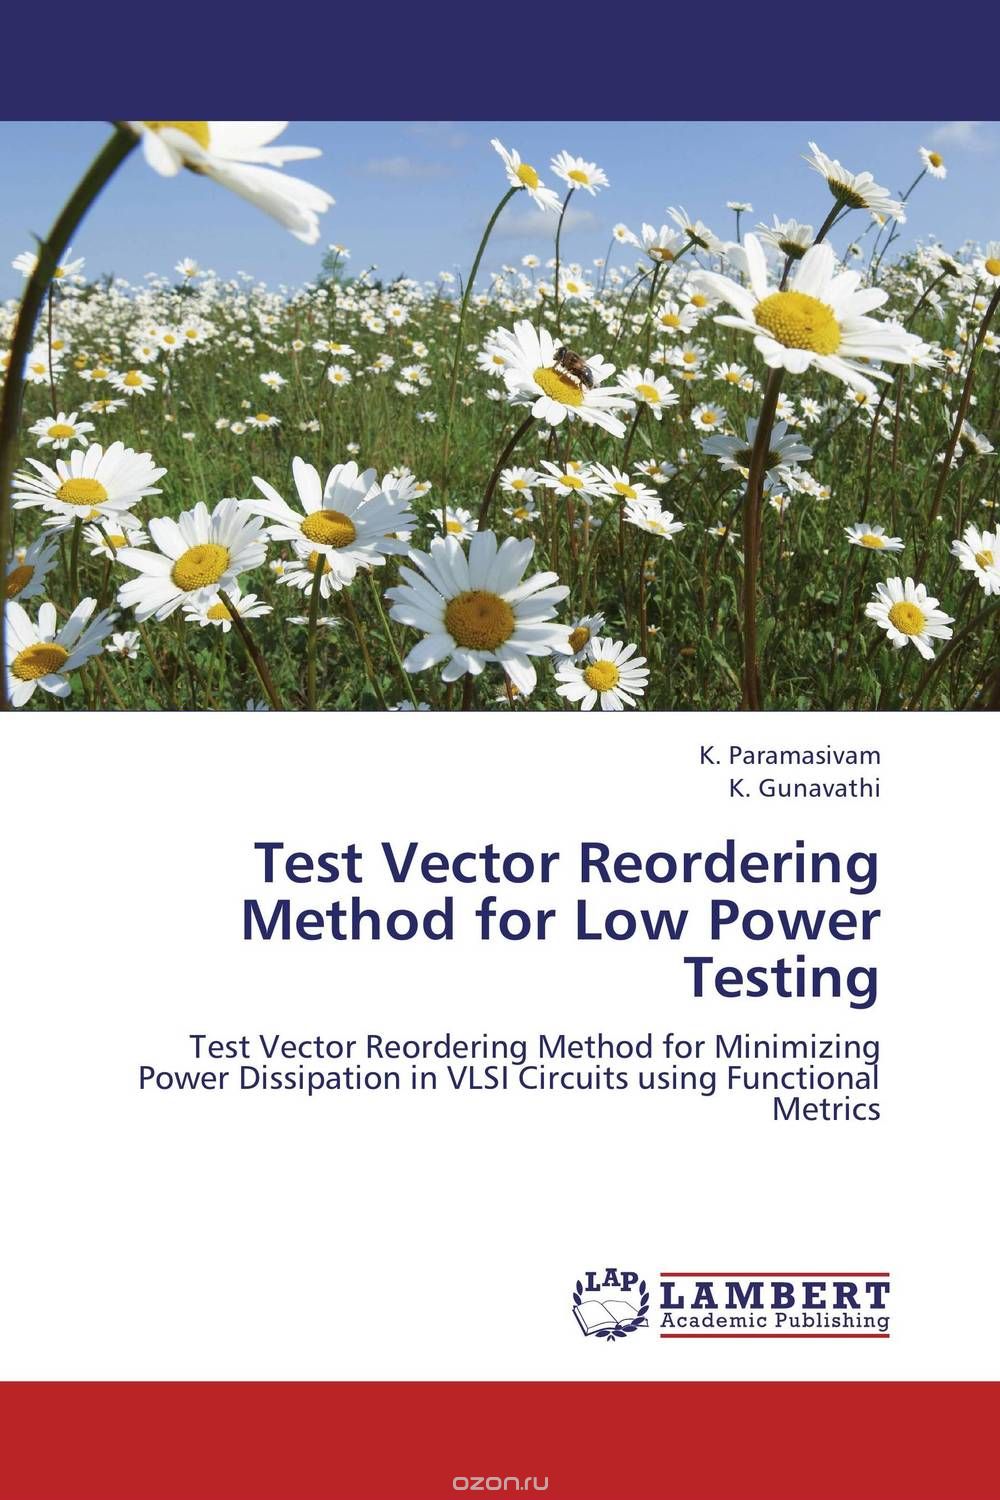 Test Vector Reordering Method for  Low Power Testing